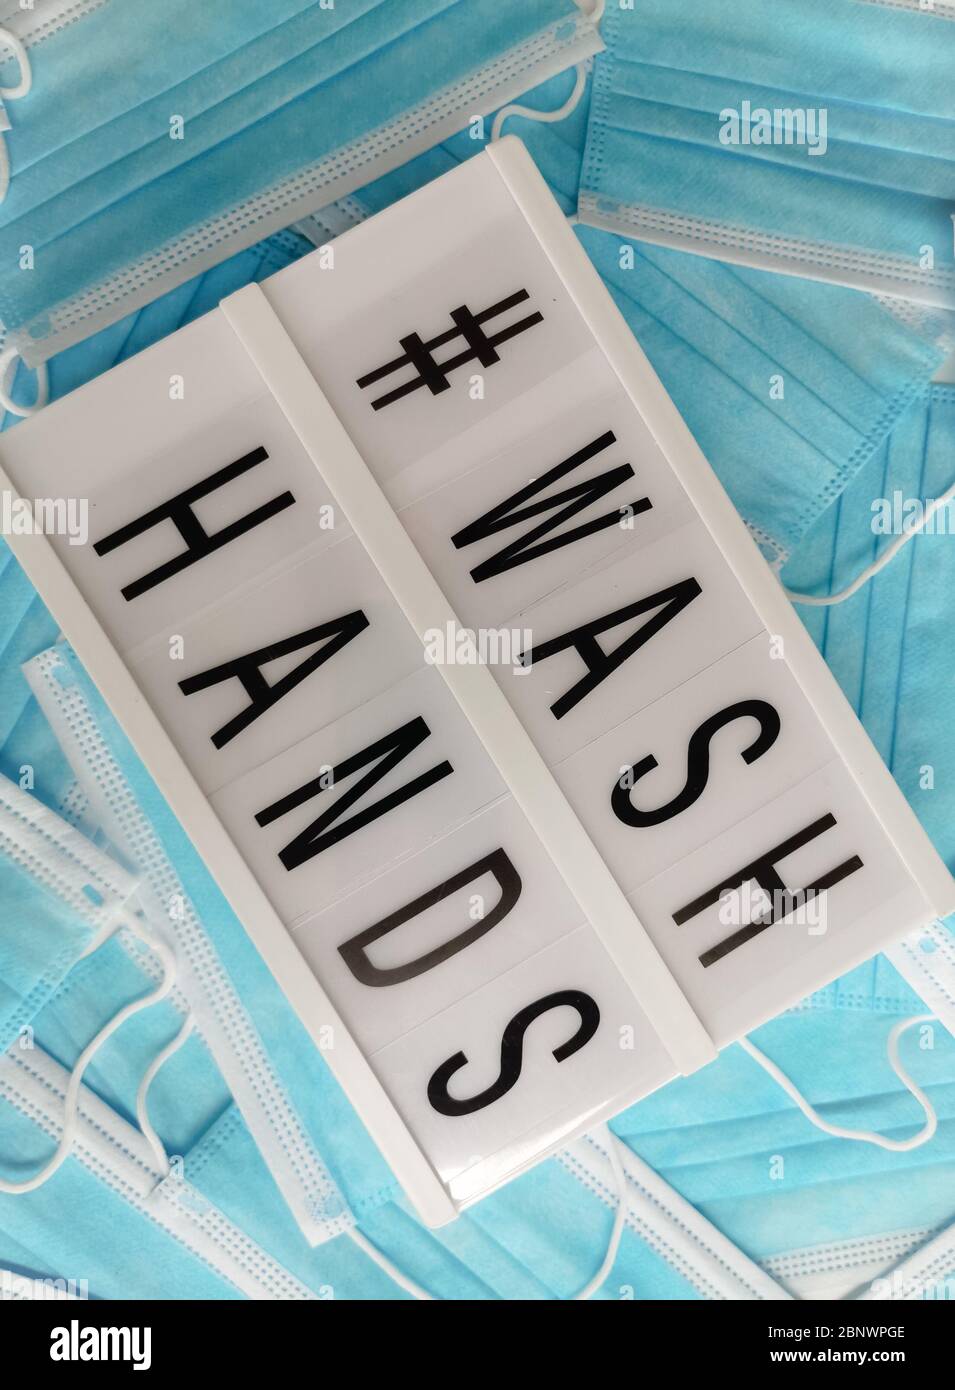 Blue surgical face masks with a white light box stating # Wash Hands Stock Photo